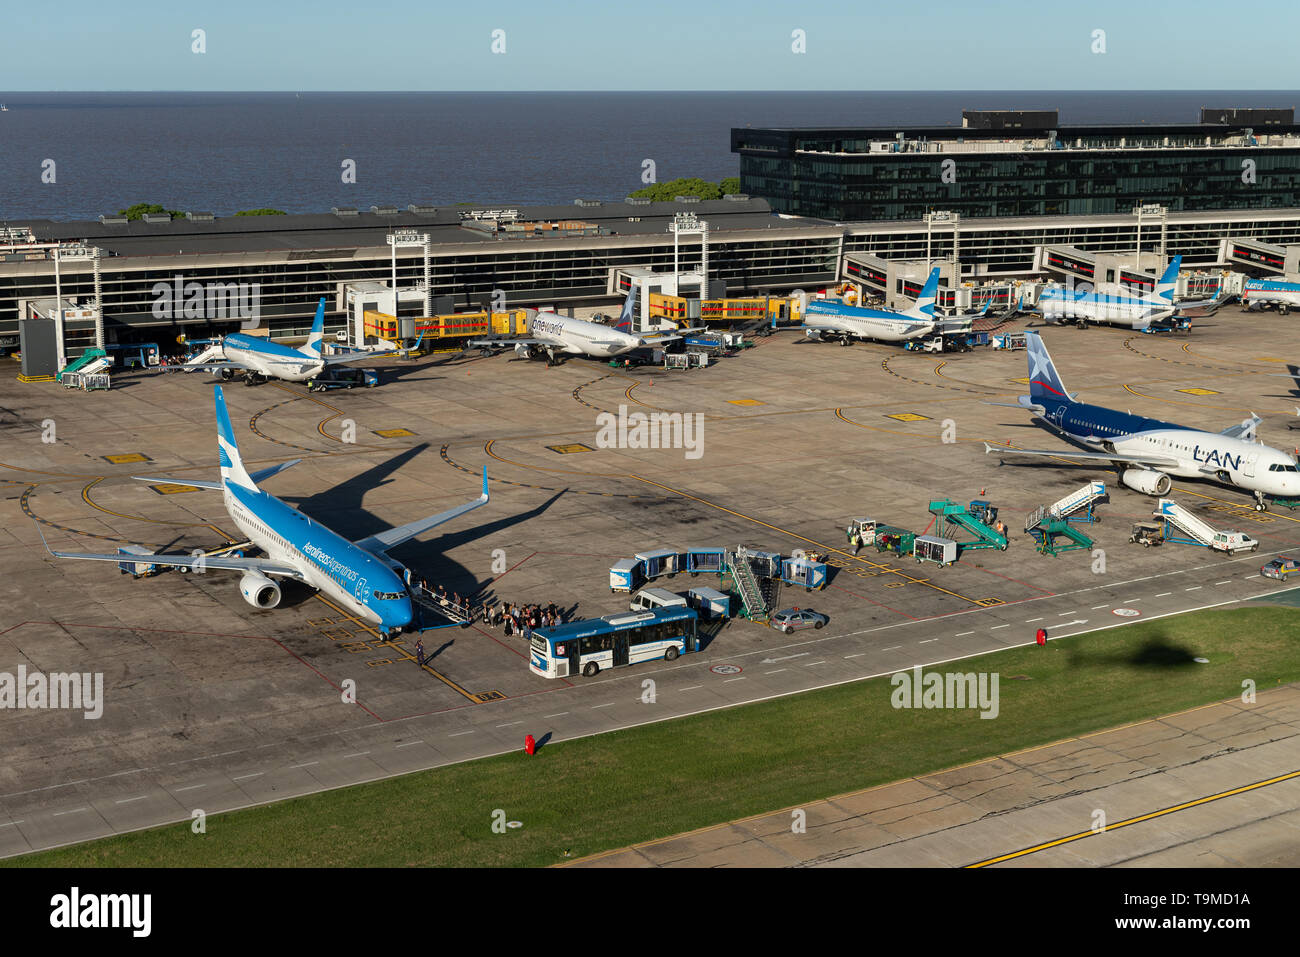 Aerial image of Jorge Newbery Airfield (Spanish: Aeroparque 'Jorge Newbery', IATA: AEP, ICAO: SABE) is an international airport located in Palermo nei Stock Photo